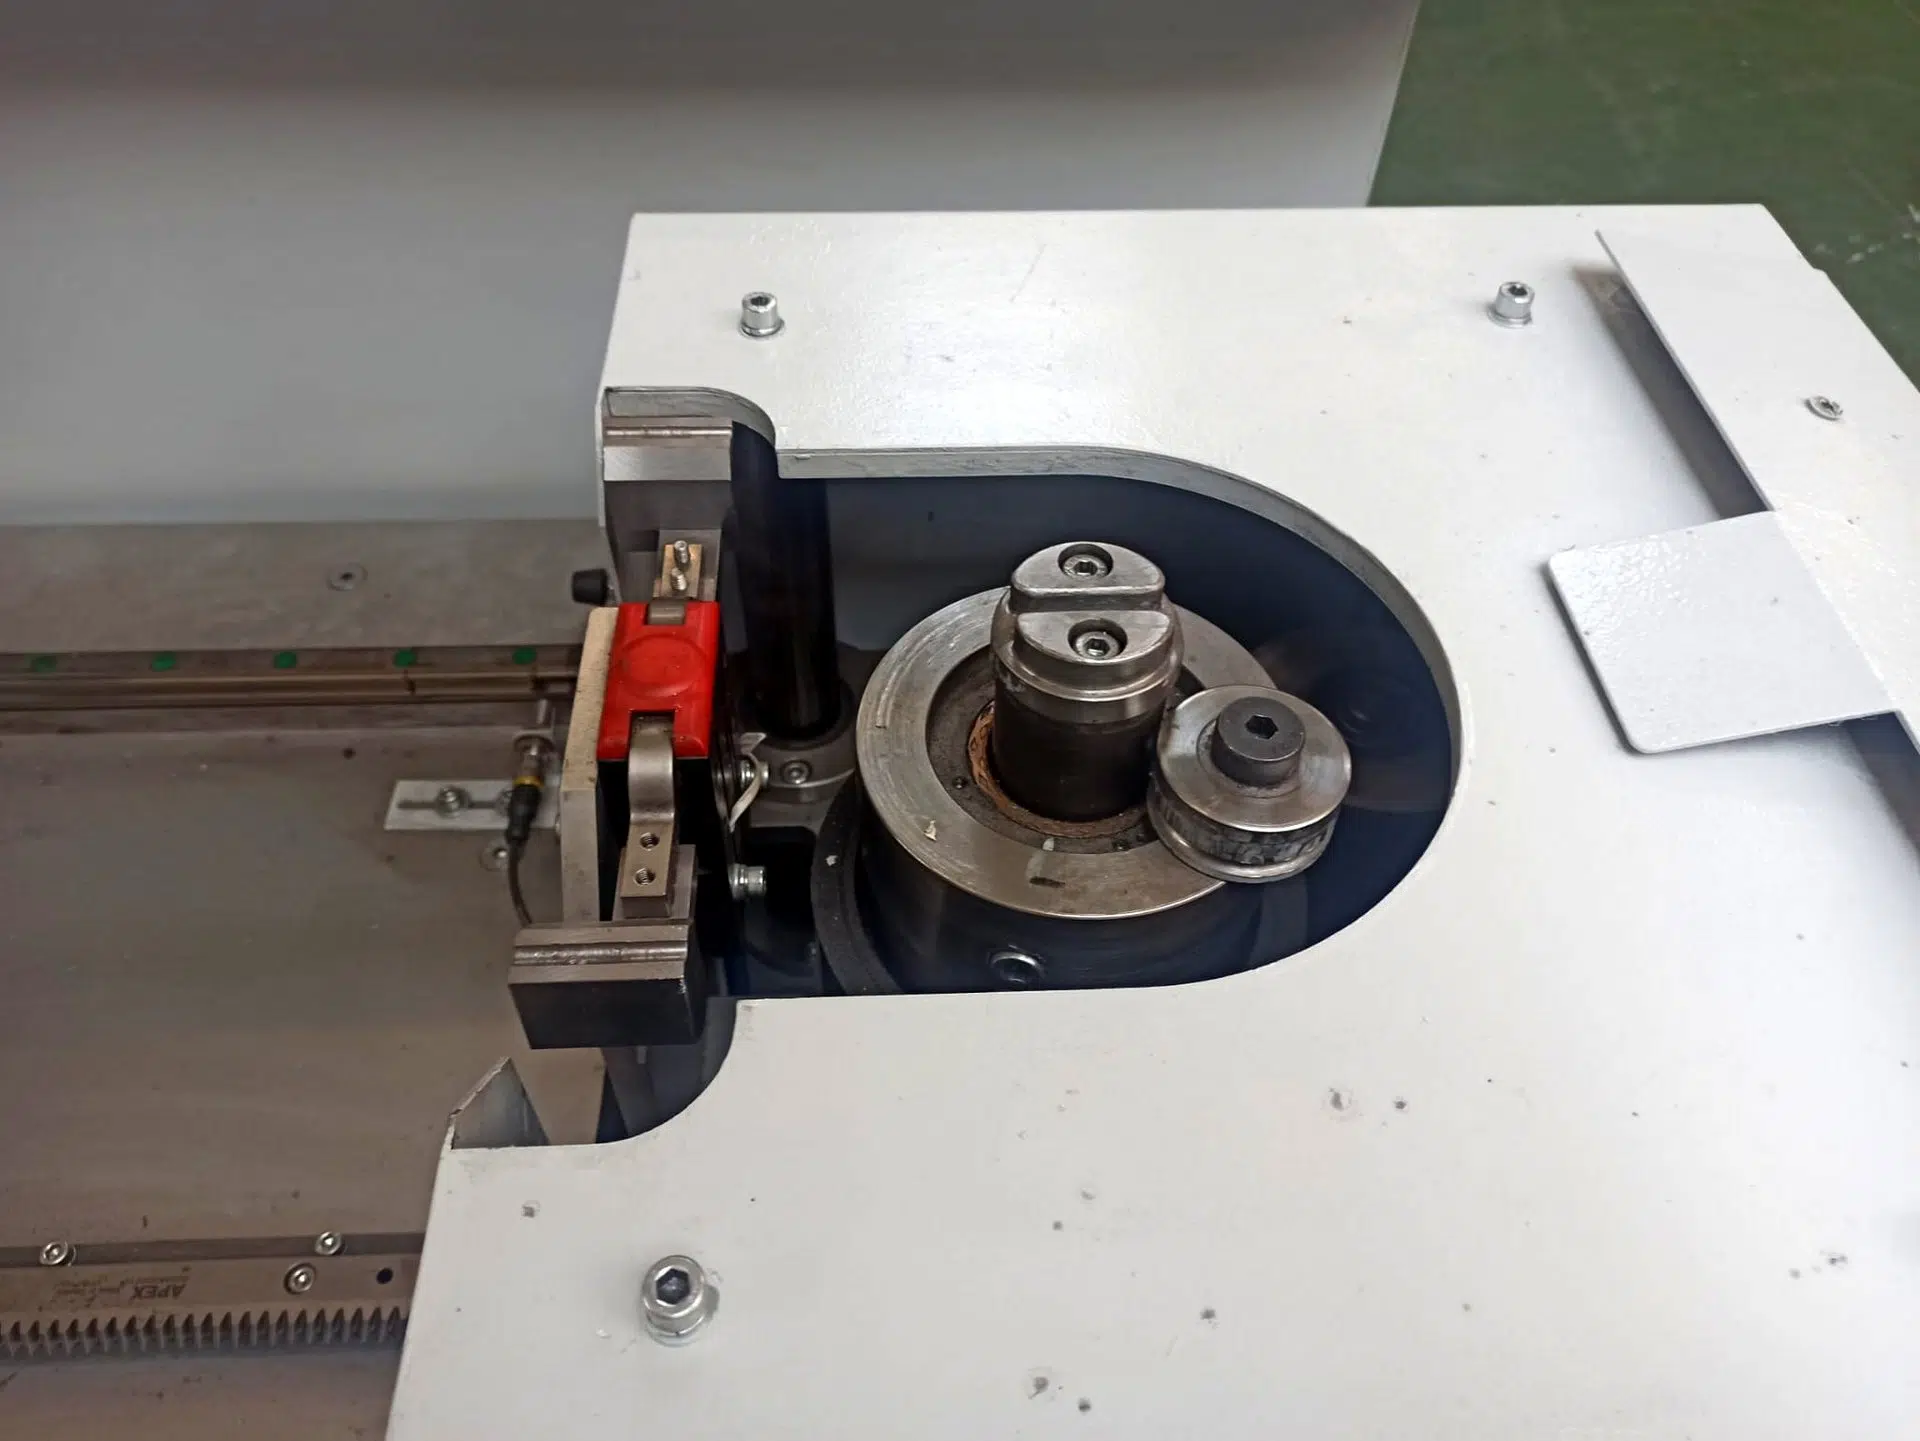 Processing and wire bending on CNC machines